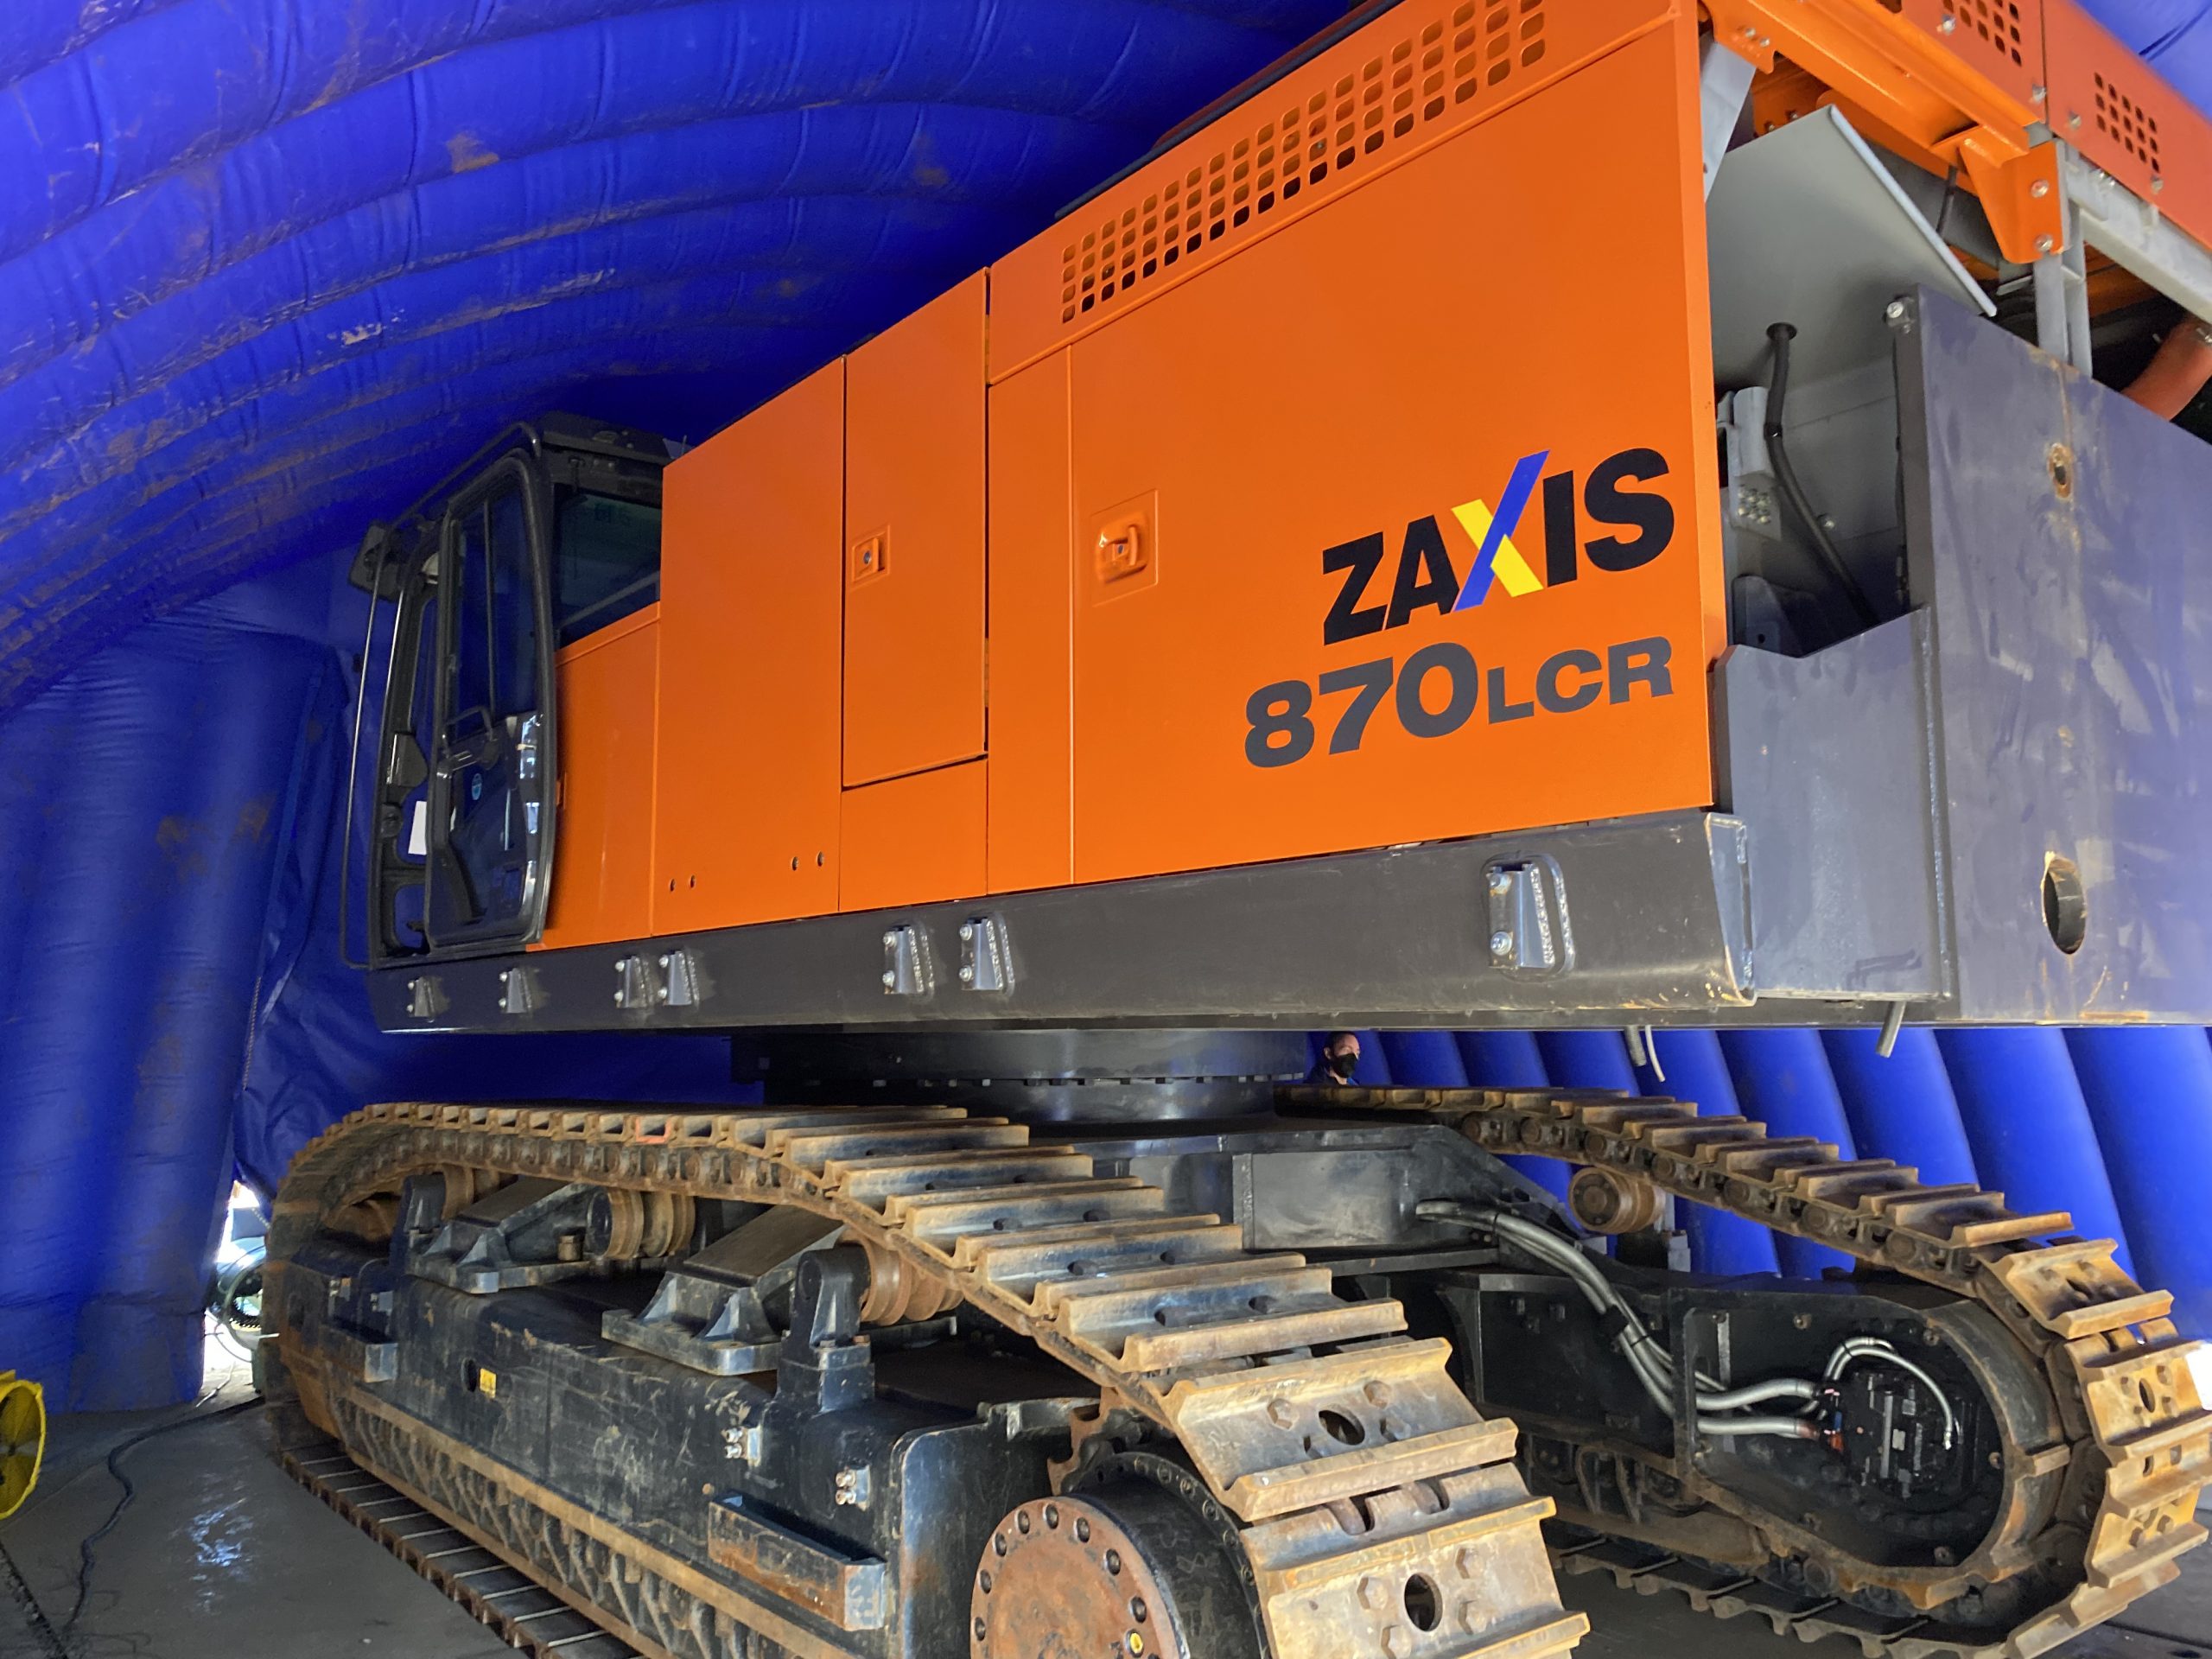 Orange Hitachi ZX870 excavator being fumigated for BMSB inside blue tent